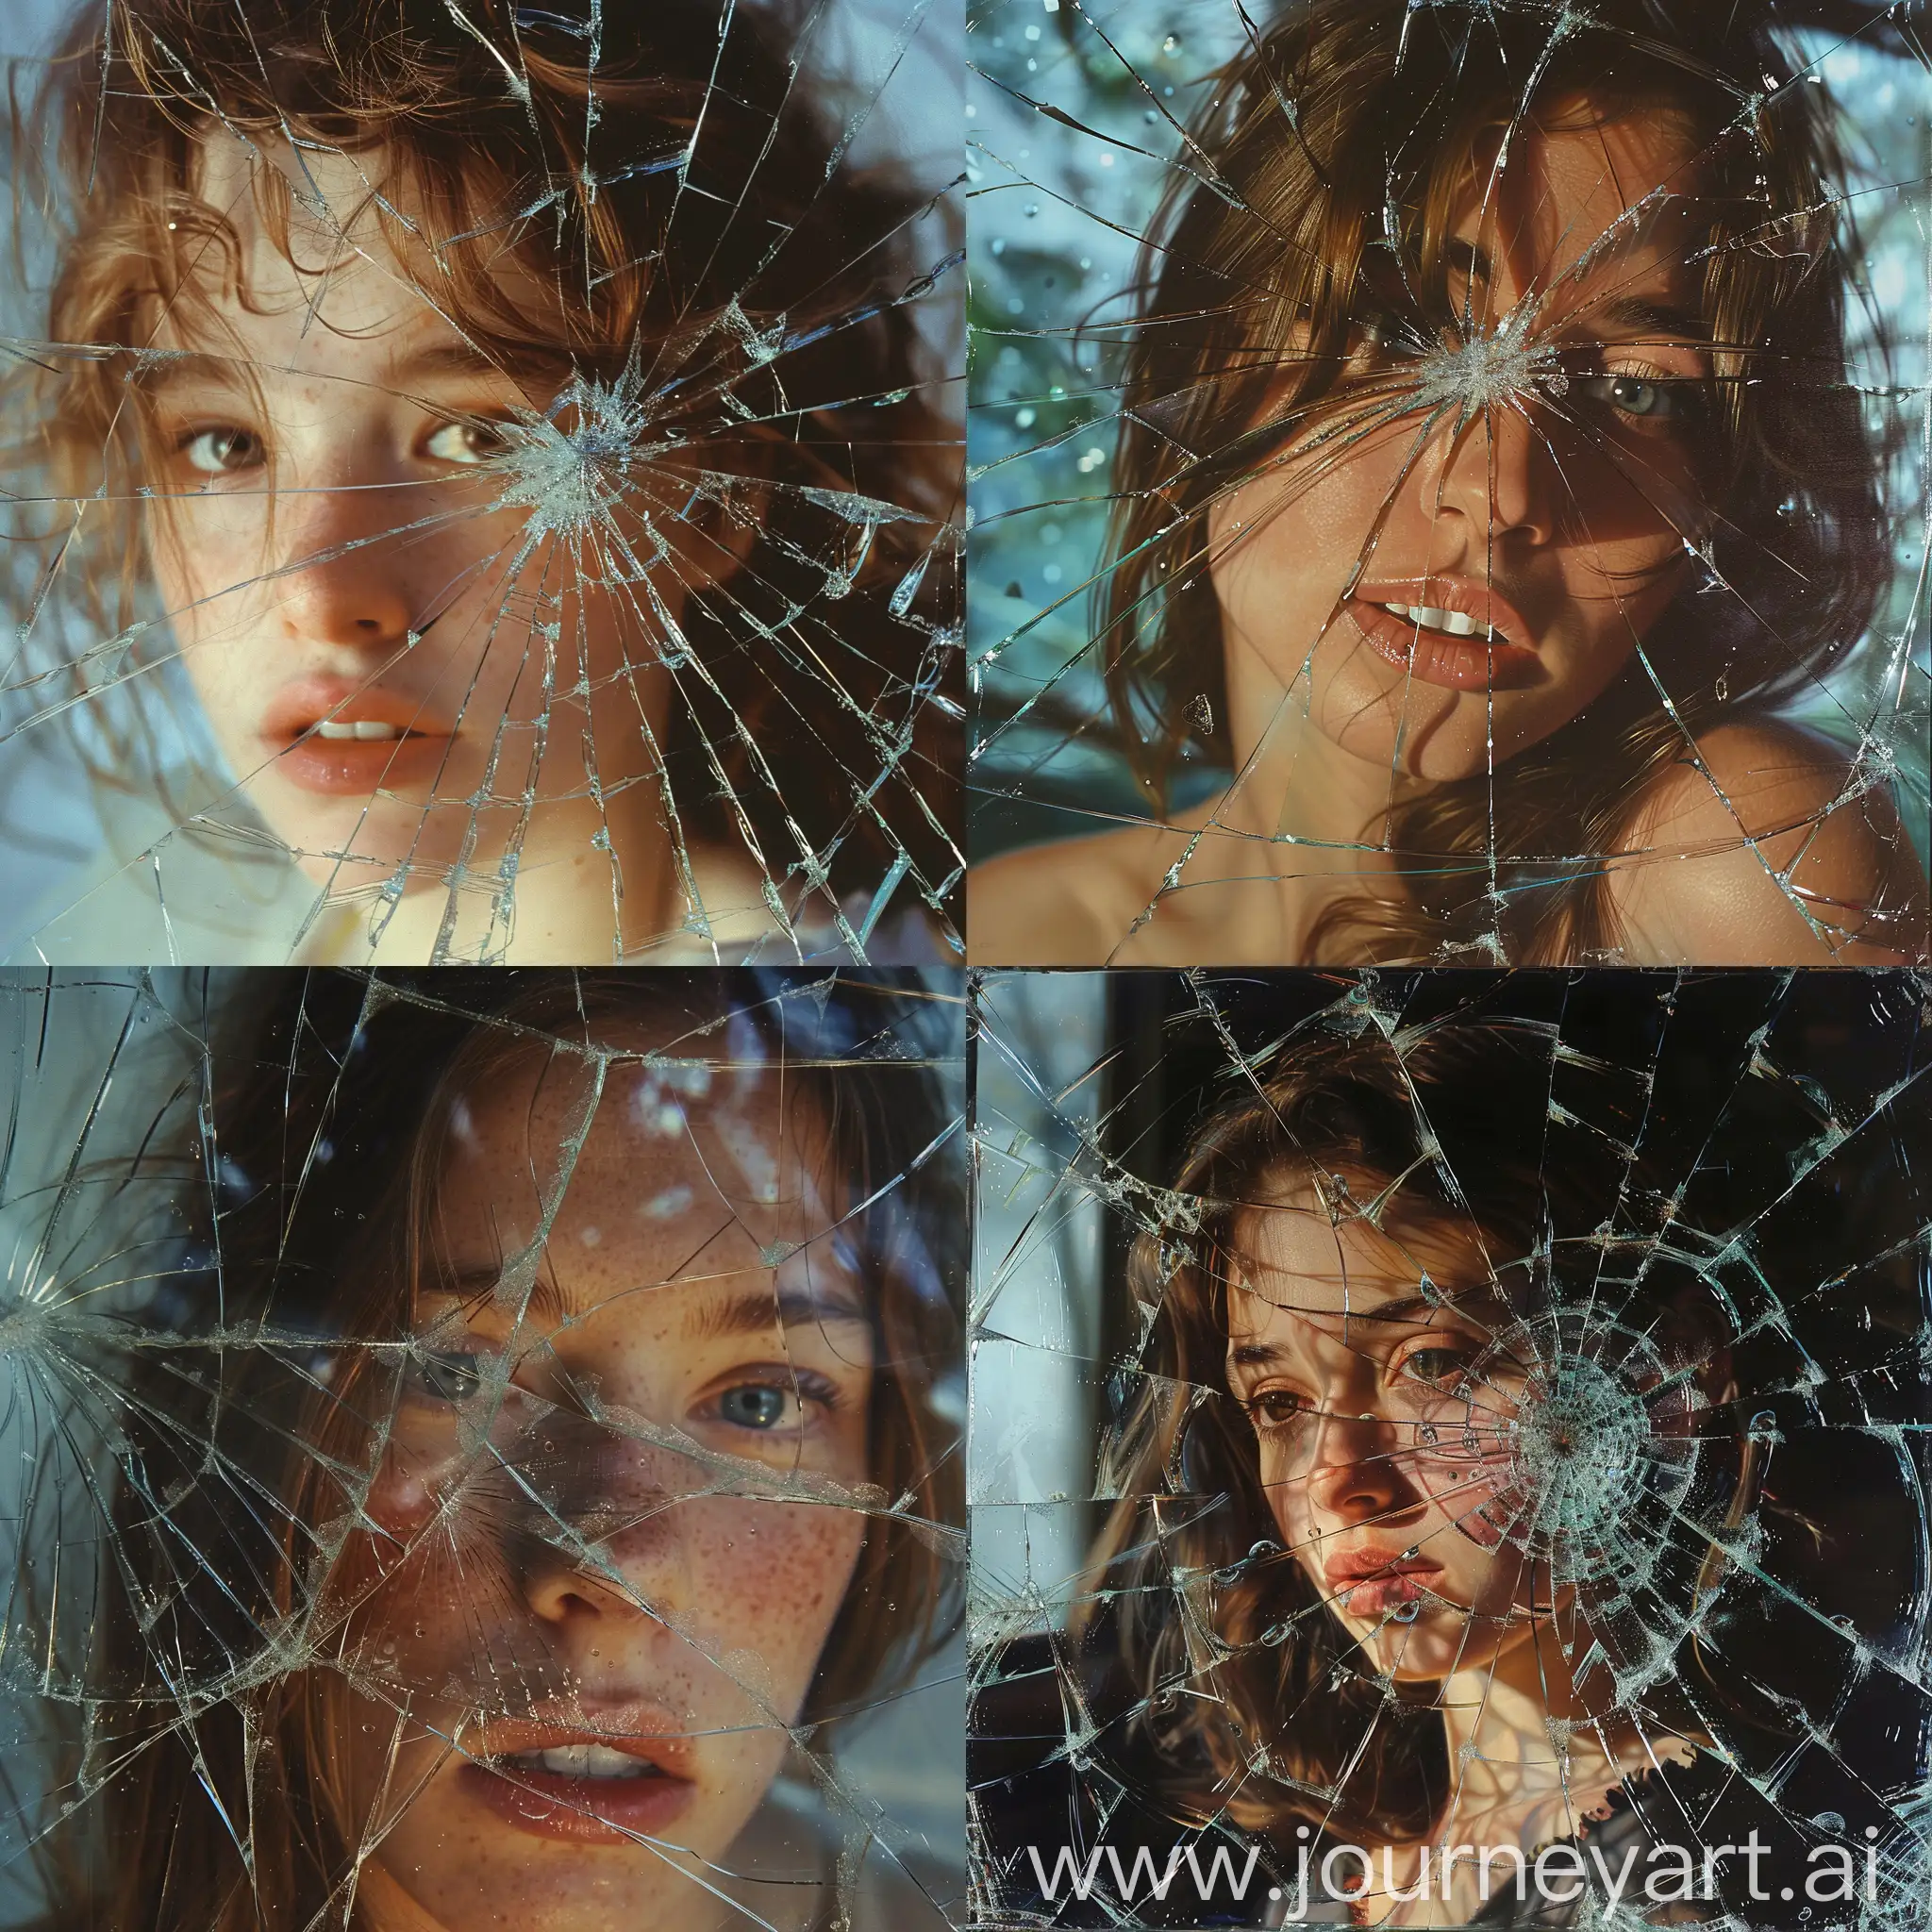 Portrait-of-Young-Woman-Amidst-Shattered-Glass-Art